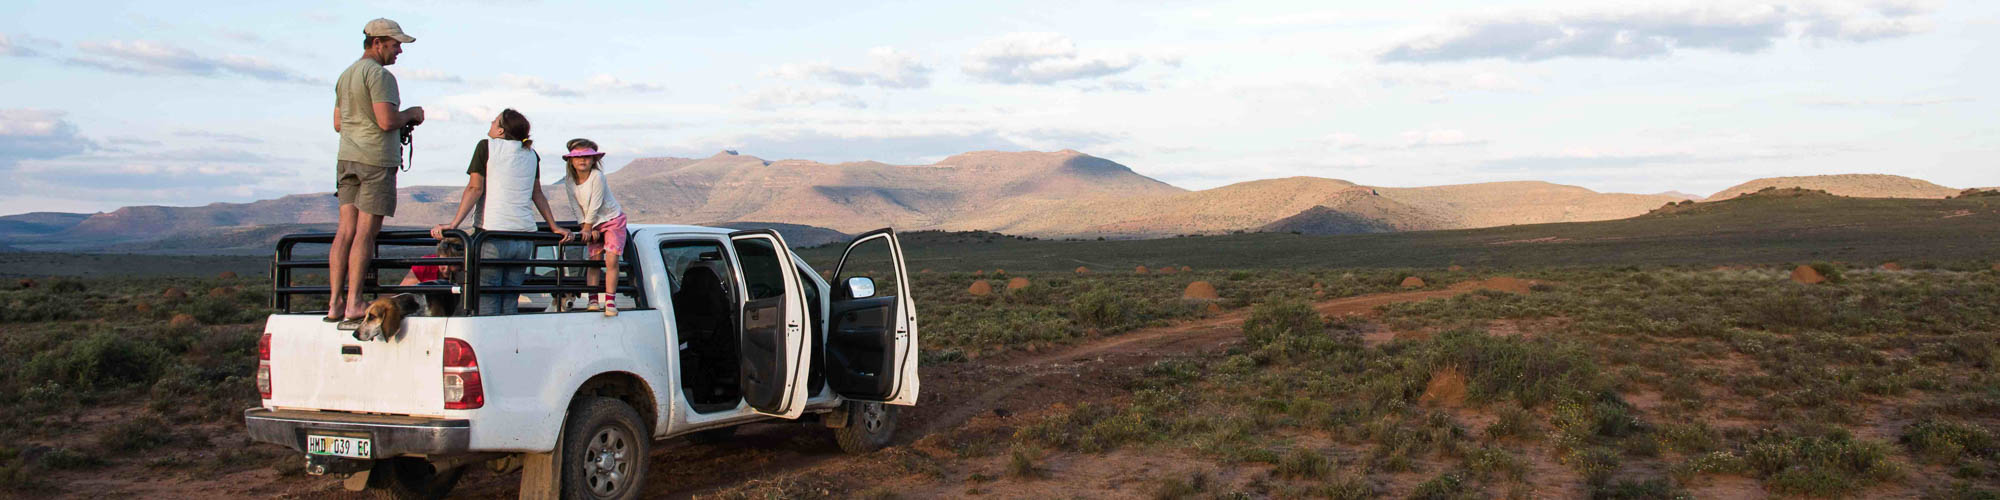 land rover family game viewing drive in karoo eco rangeland